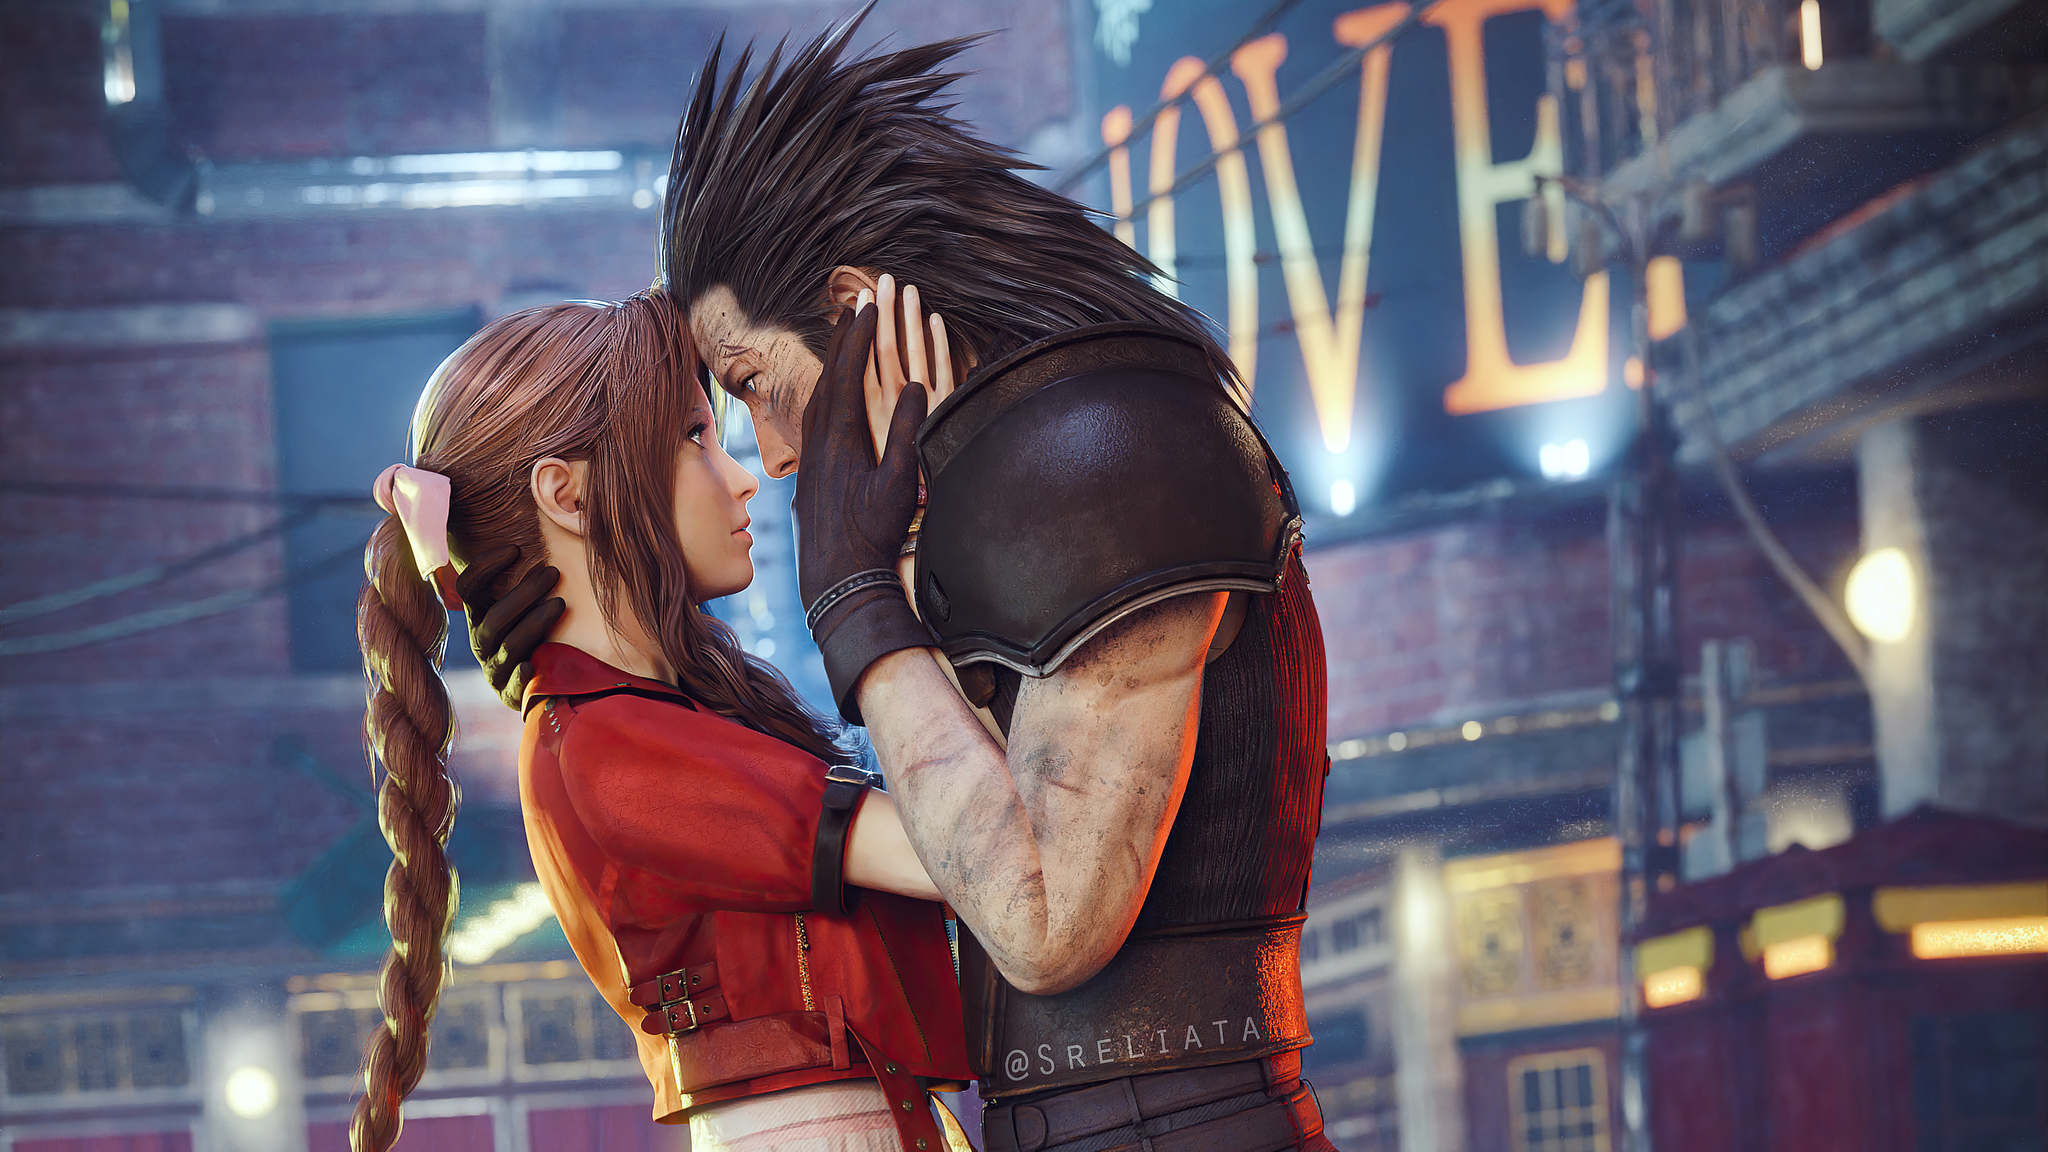 2048x1152 Aerith Gainsborough And Cloud Strife Final Fantasy 7 Remake 4k 2048x1152 Resolution Hd 4k Wallpapers Images Backgrounds Photos And Pictures